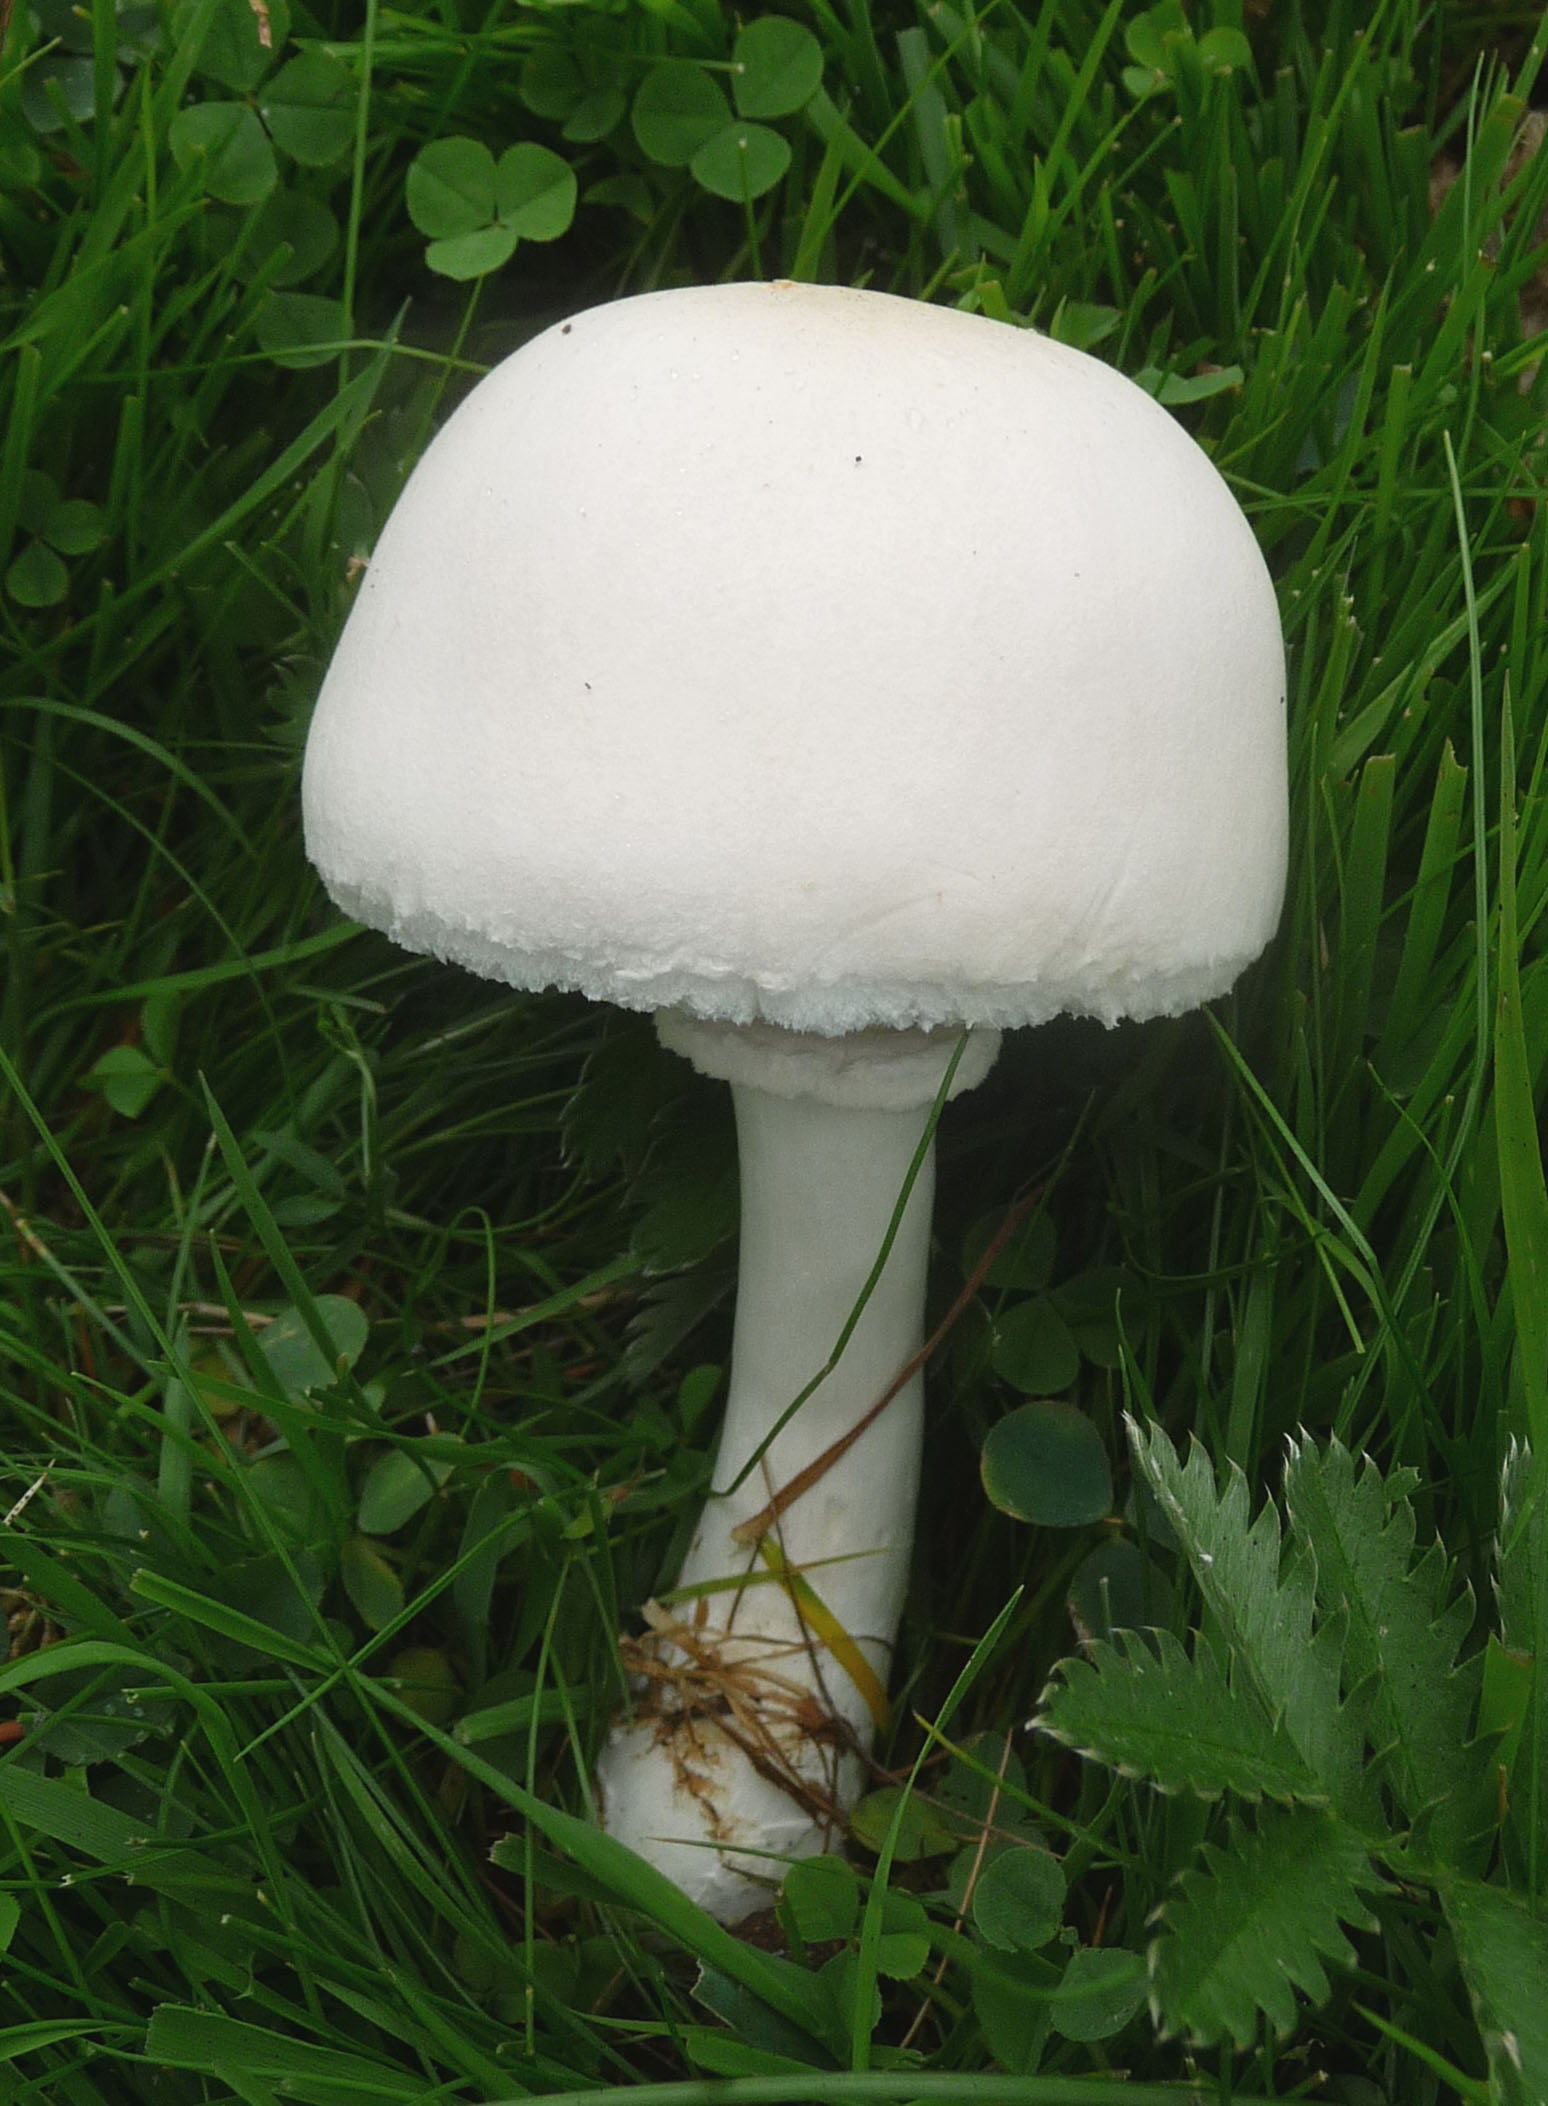 Destroying Angel’s are often found at the edges of woodlands